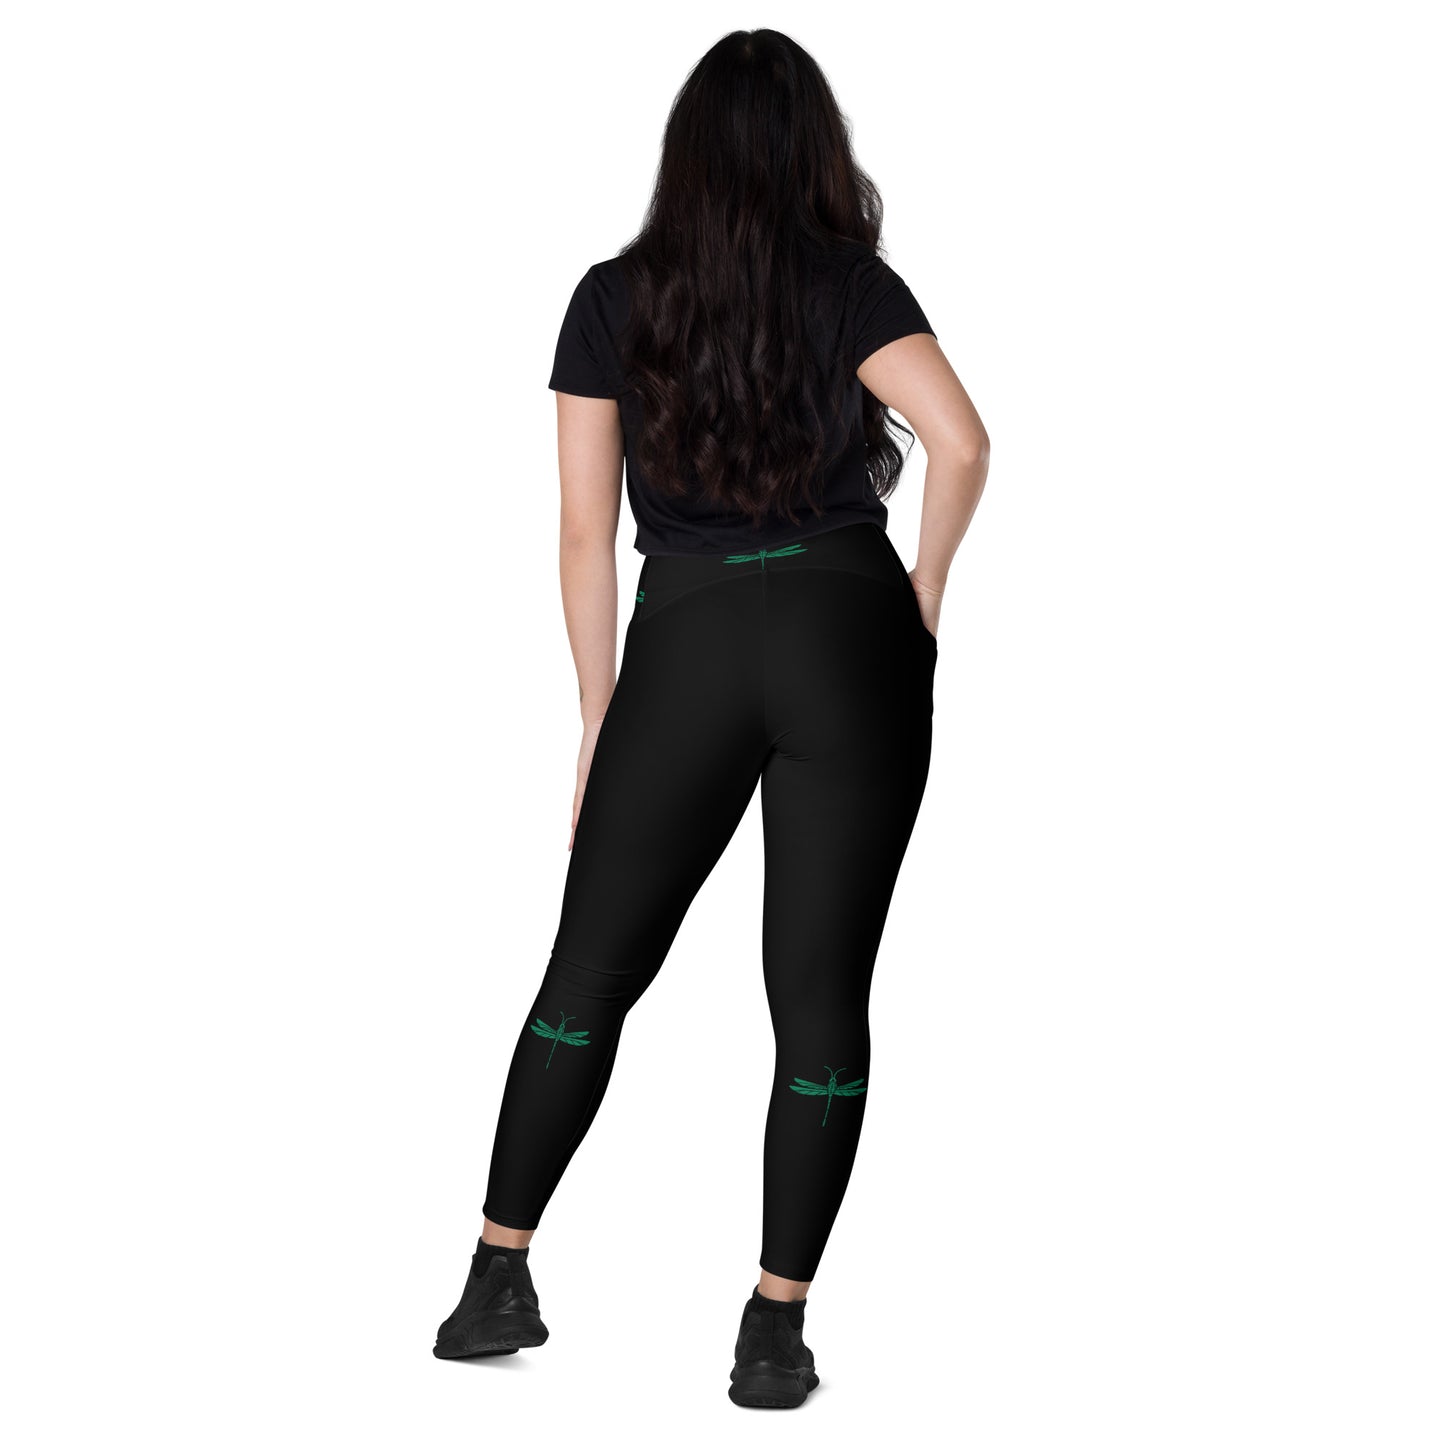 Black crossover leggings with pockets